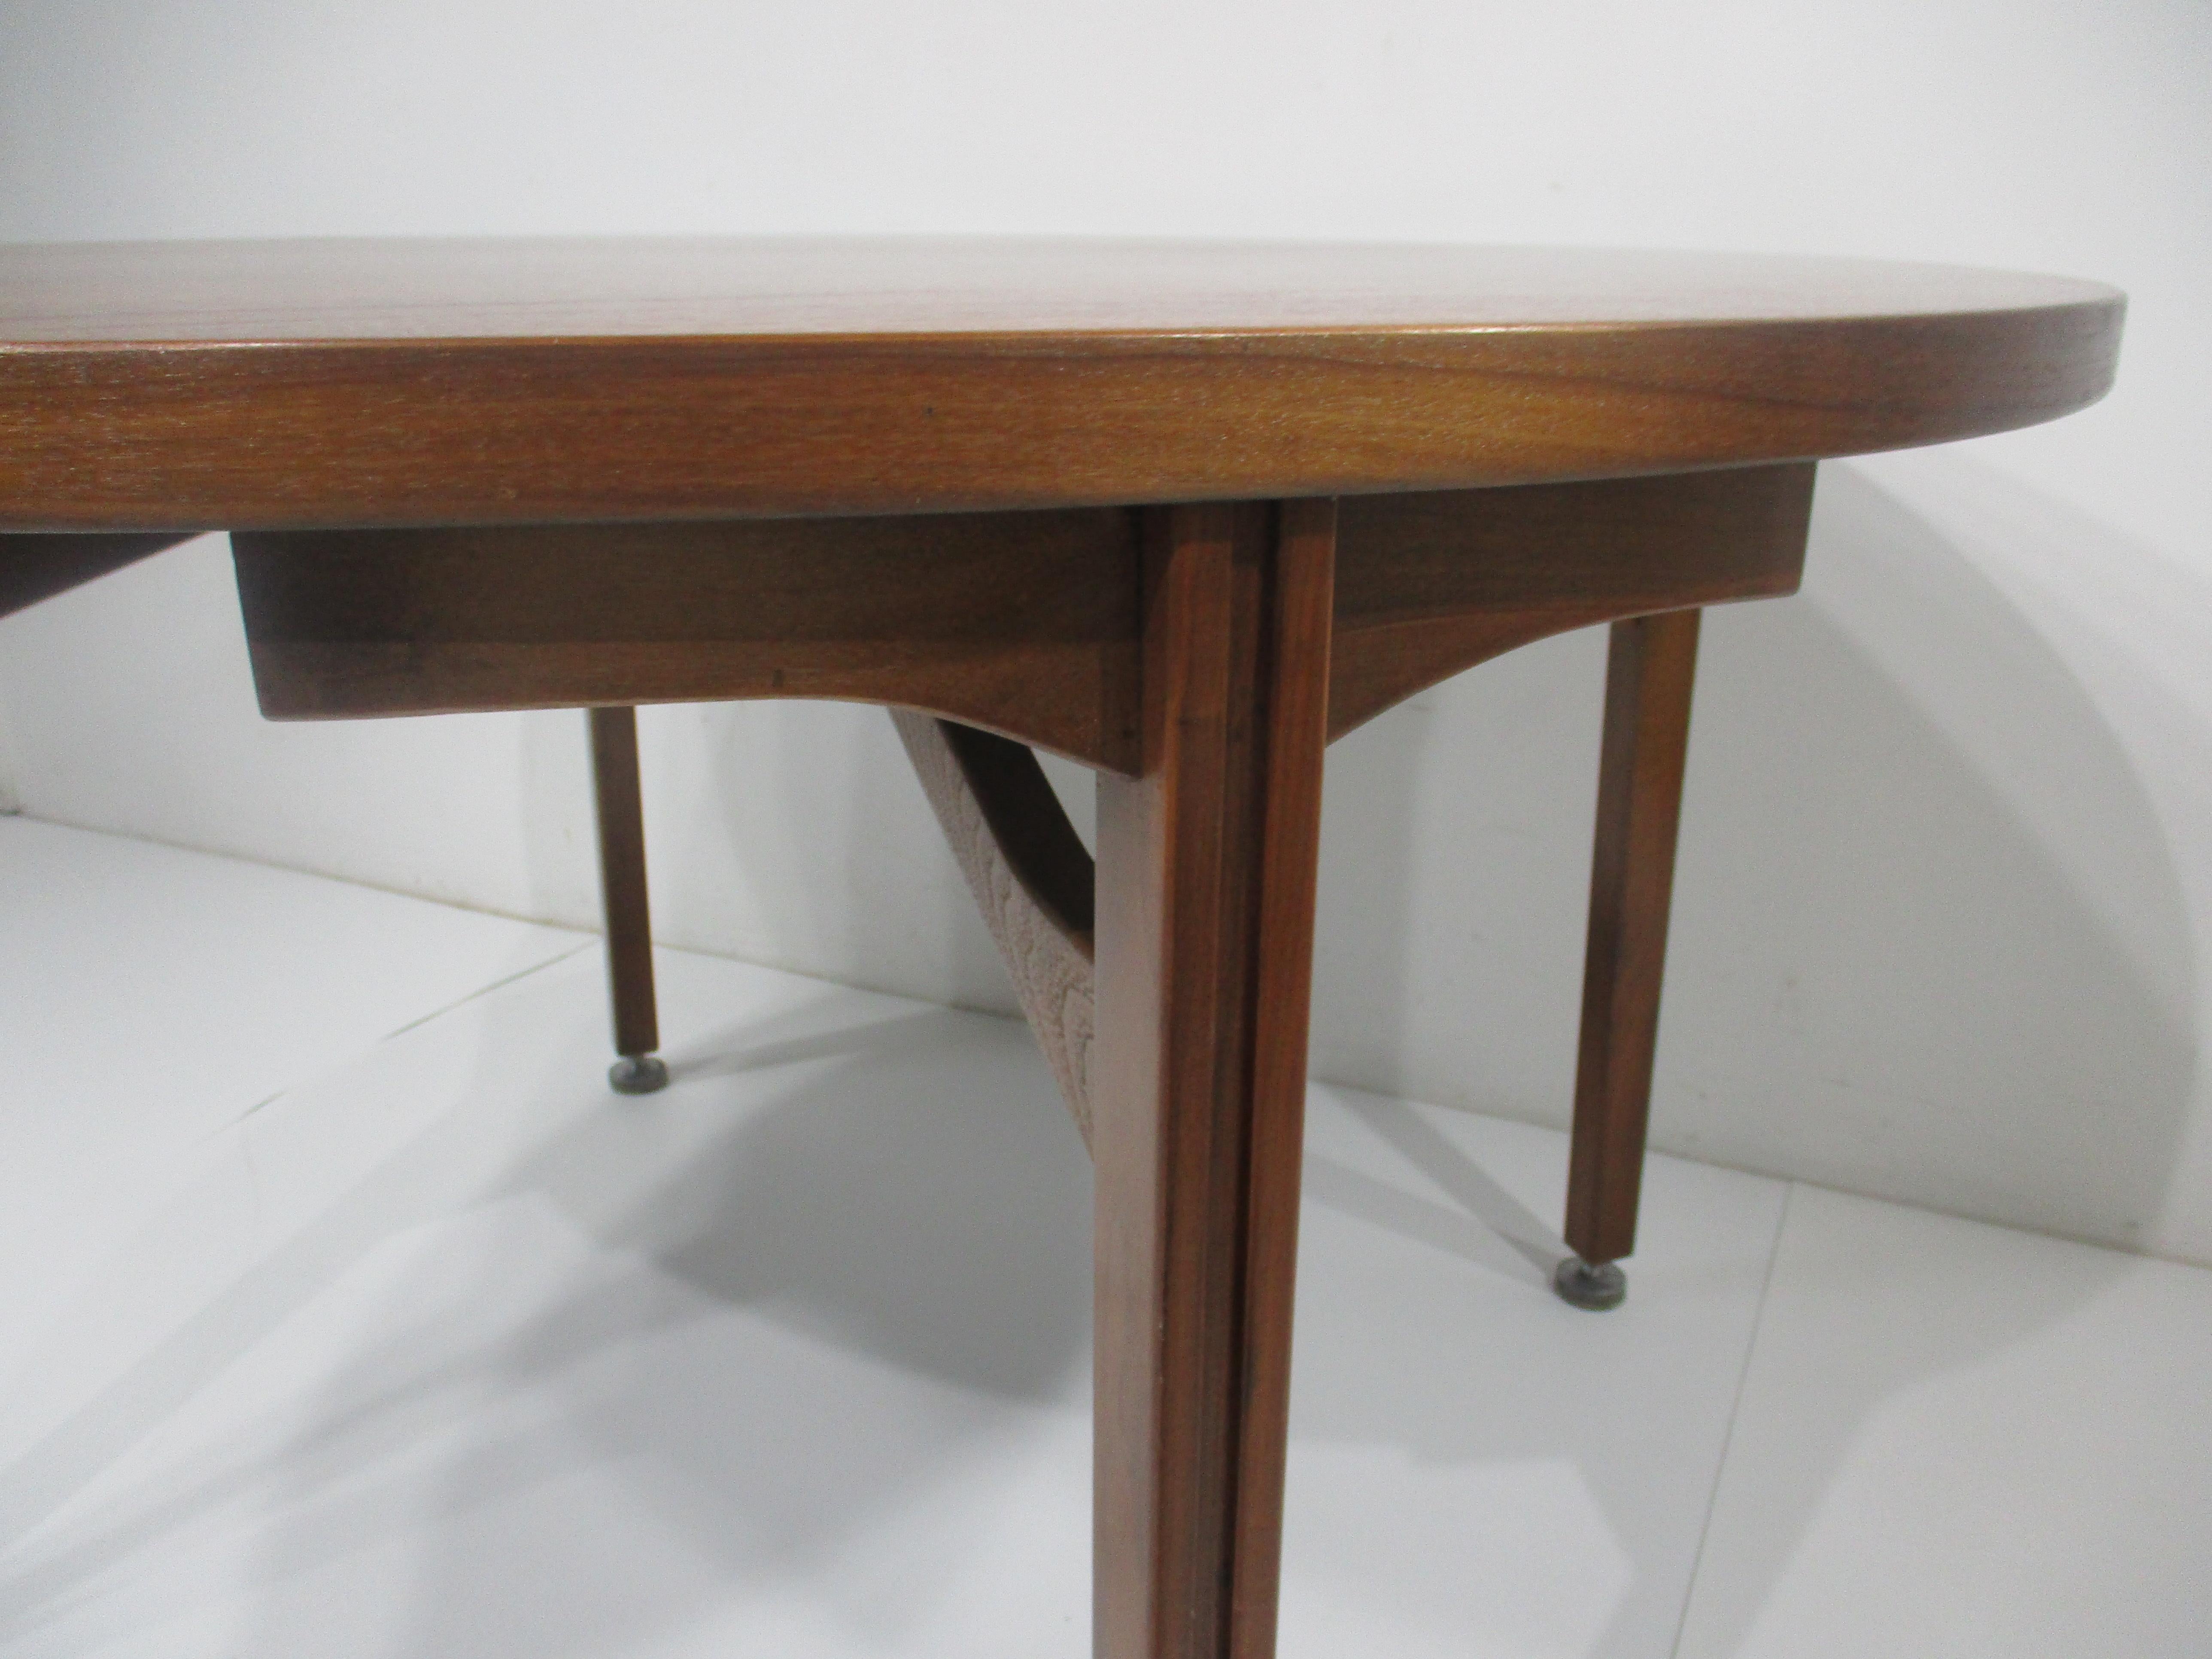 Jens Risom Danish Styled Walnut Dining Table by Risom Designs  In Good Condition For Sale In Cincinnati, OH